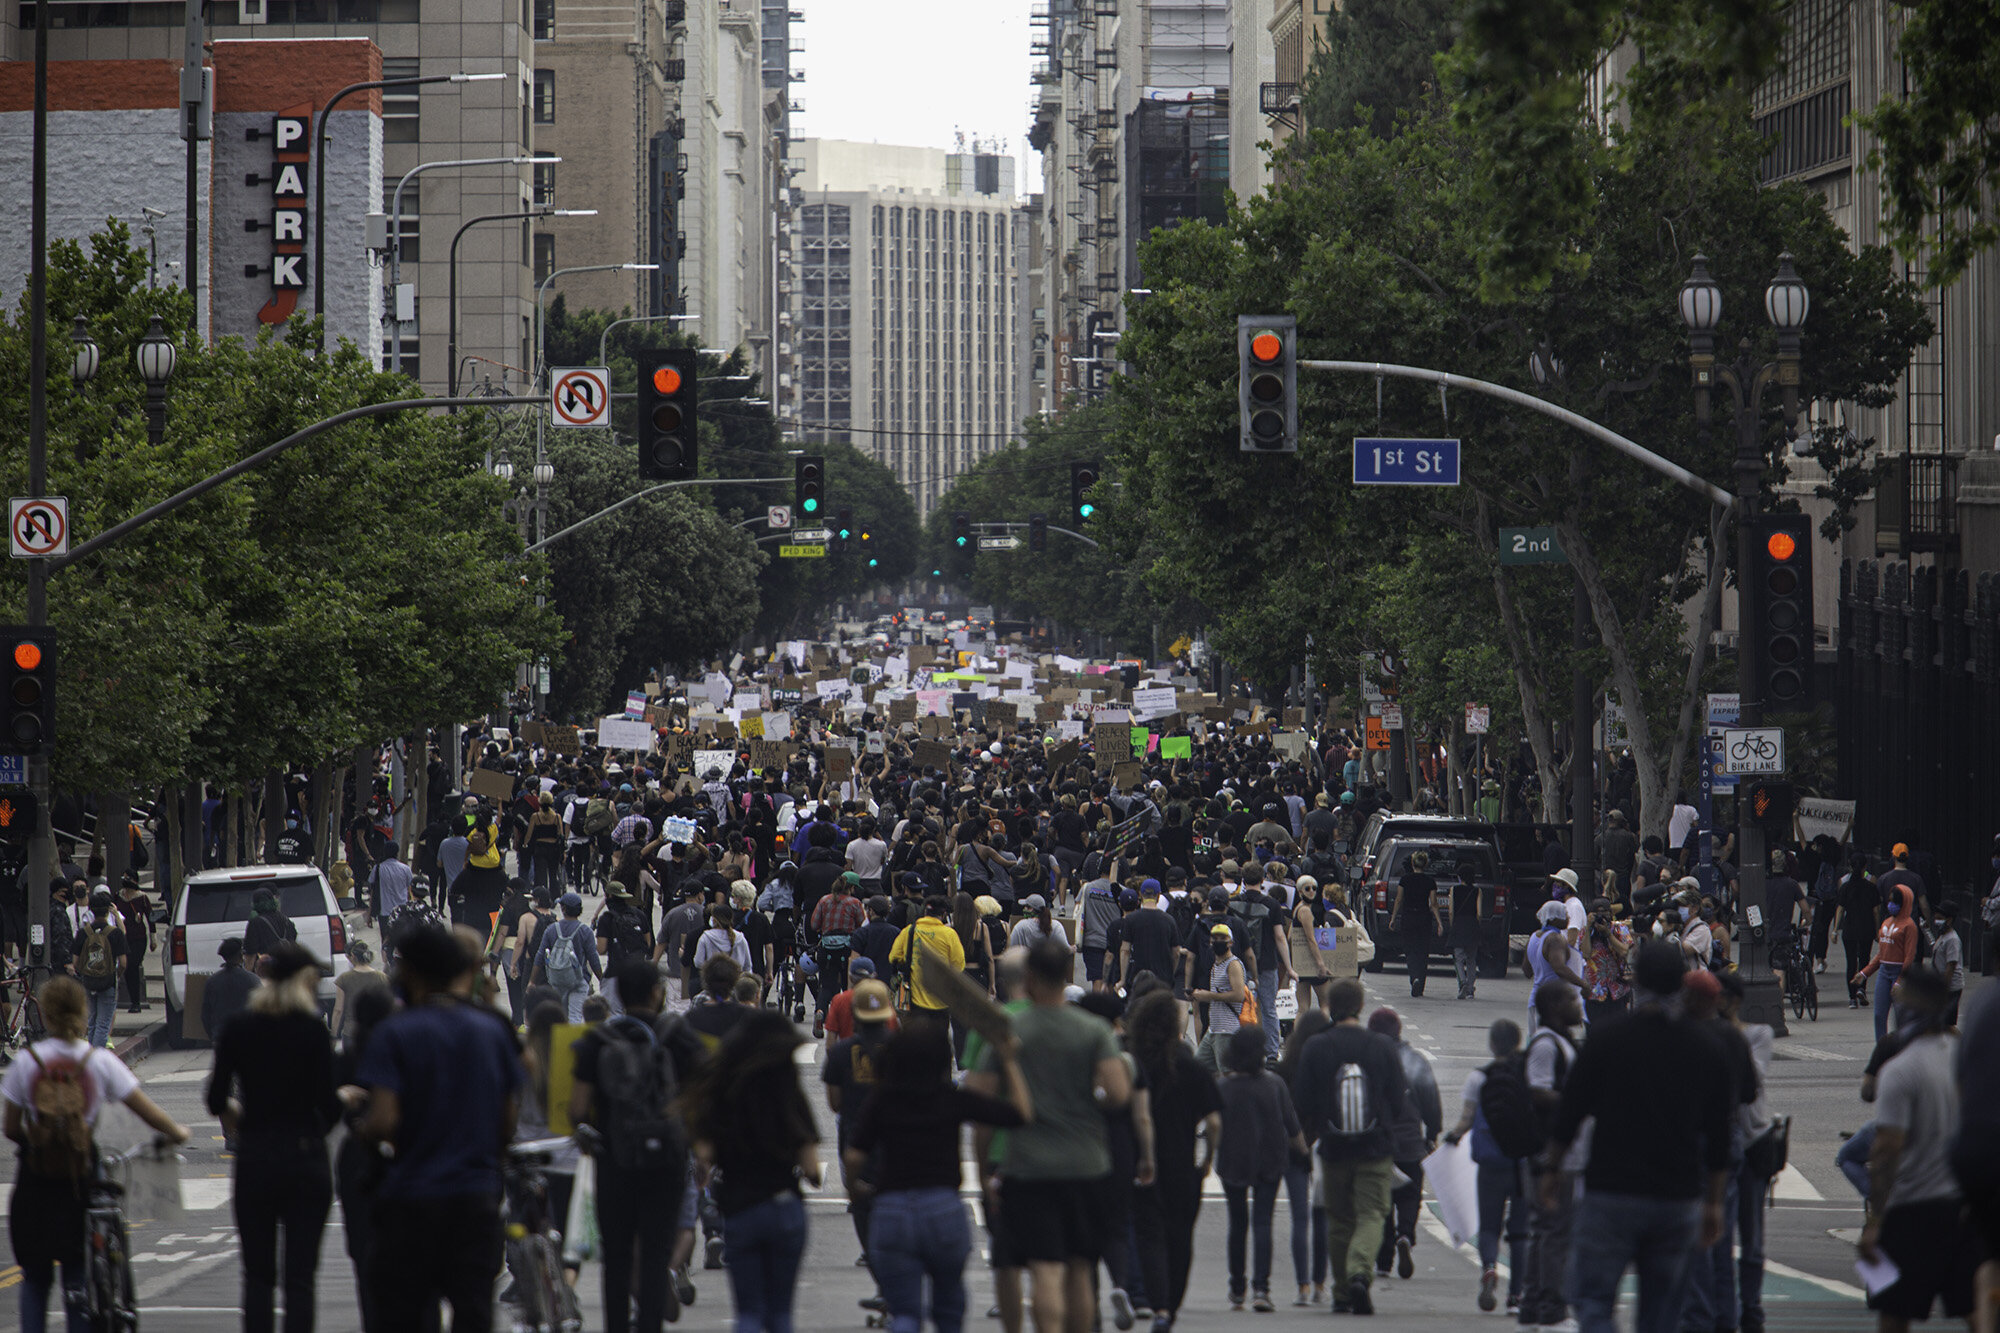  Thousands of protestors marching from City Hall through Downtown Los Angeles during a demonstration and demanding justice for George Floyd on Tuesday, June 2,2020 in Los Angeles, Calif. 